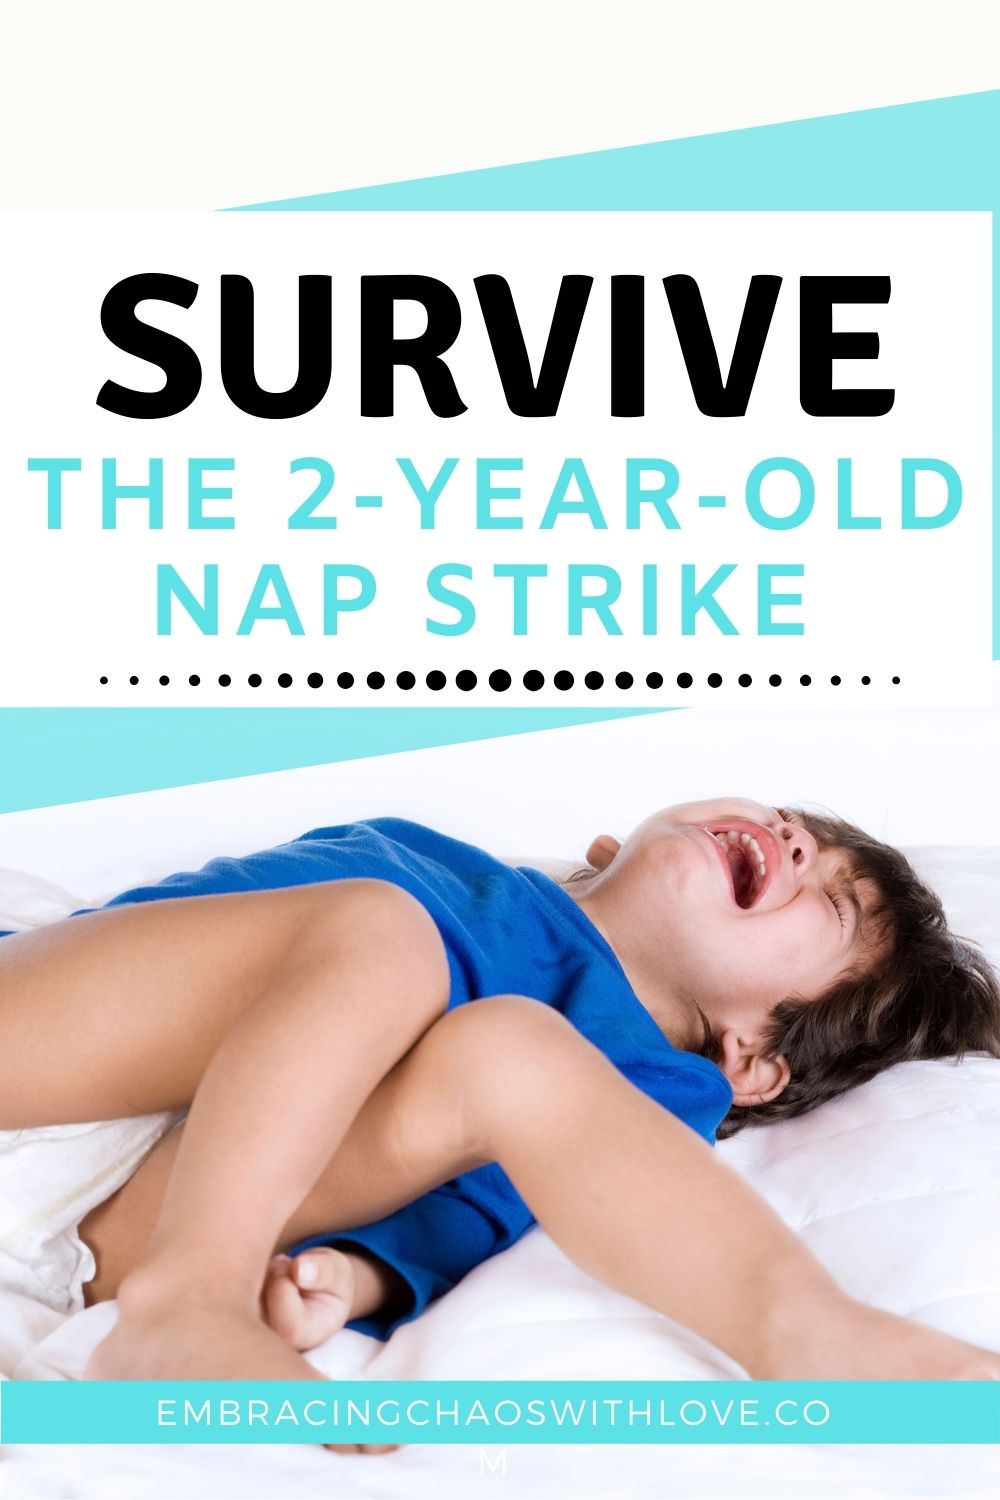 How to Survive the 2-Year-Old Nap Strike